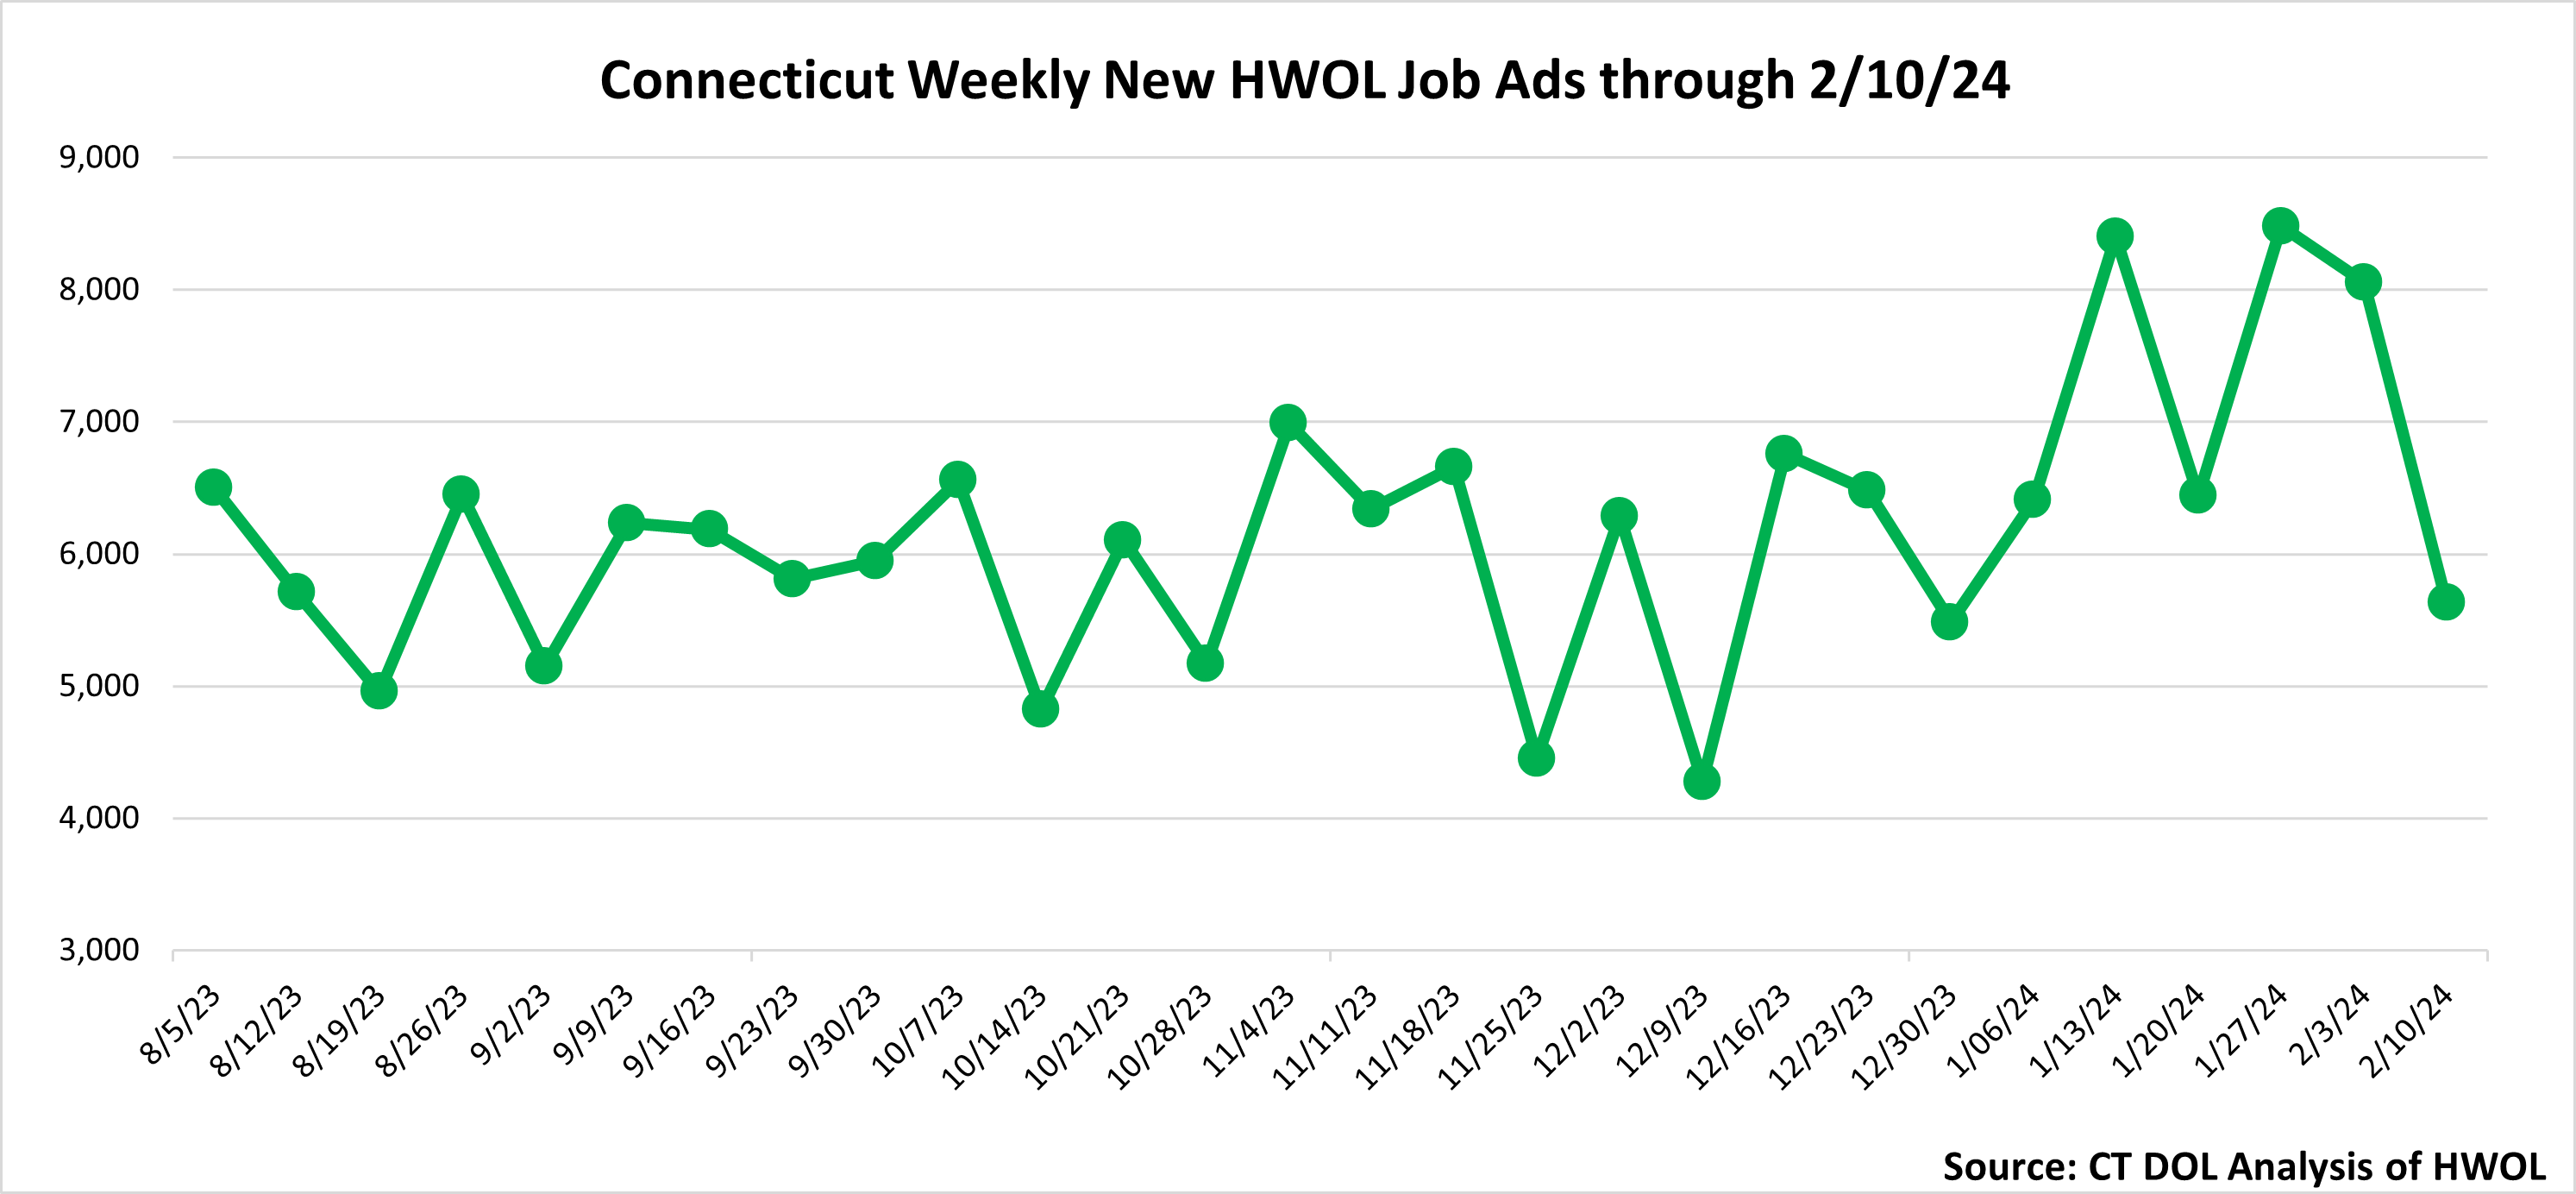 Connecticut Weekly Statewide New HWOL Job Ads through 2/10/24